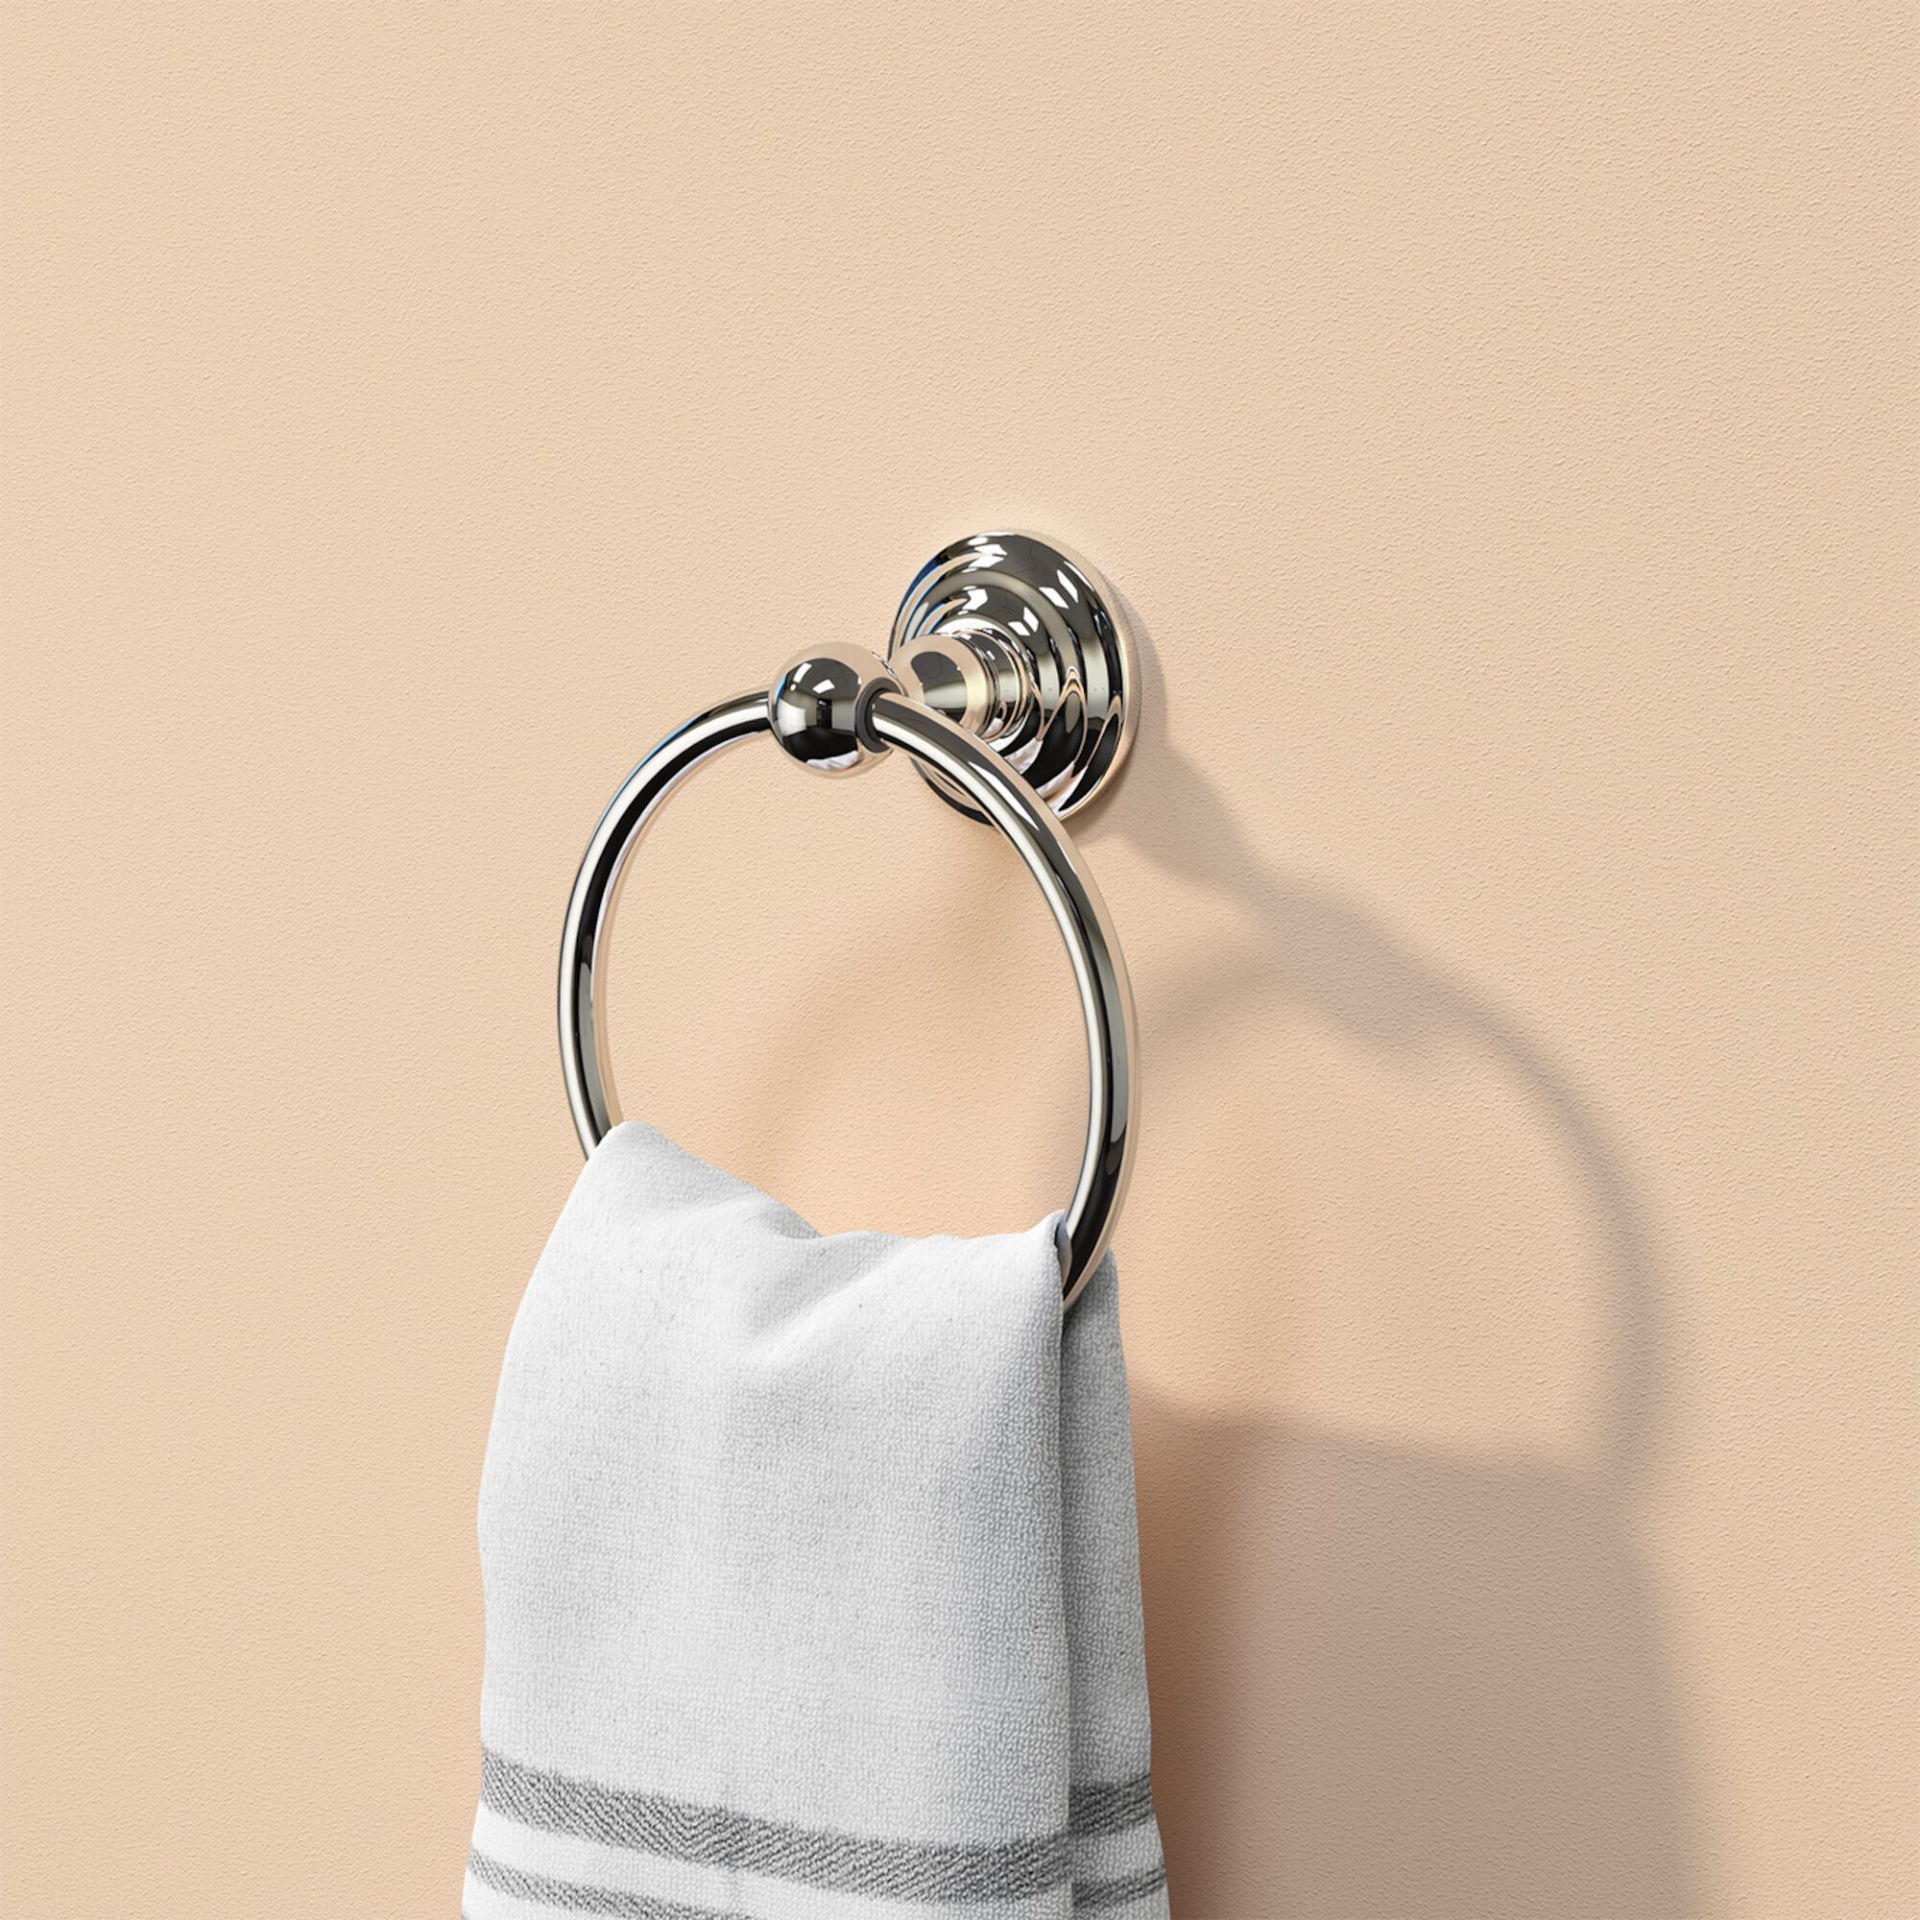 (E1034) York Towel Ring Finishes your bathroom with a little extra functionality and style Ma...